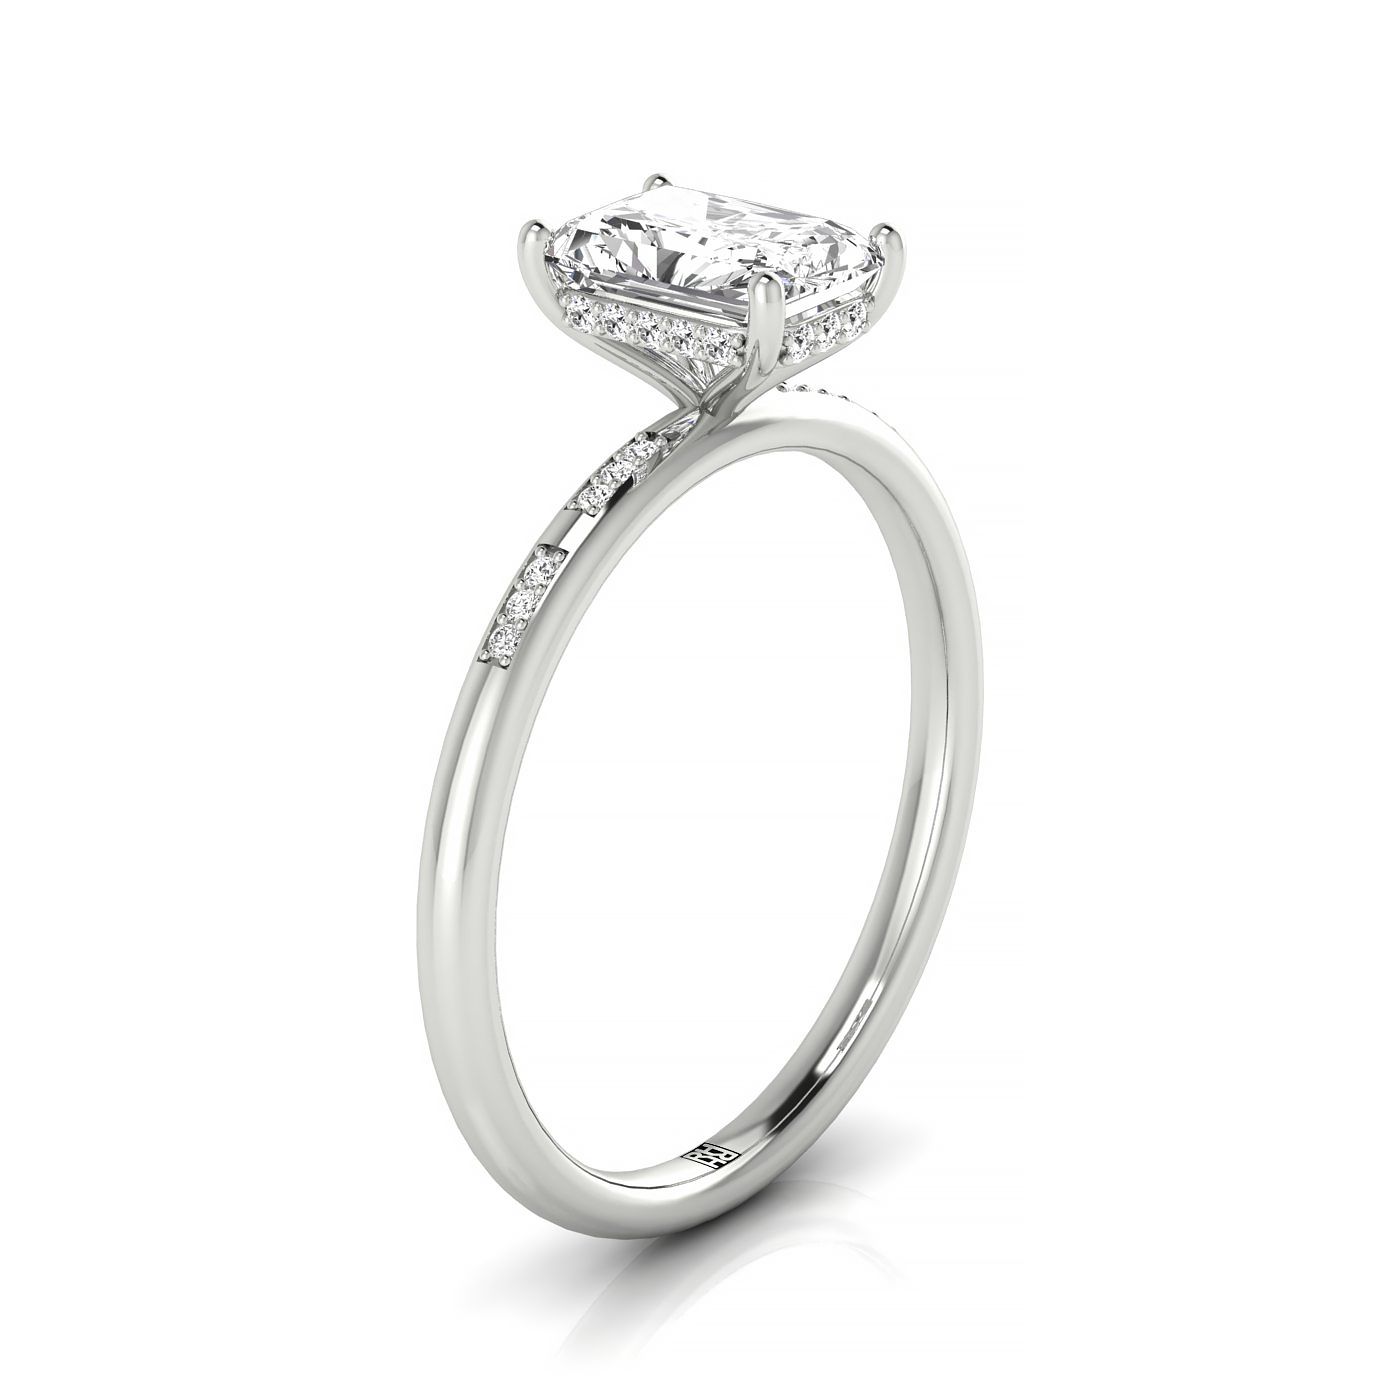 18kw Radiant Engagement Ring With High Hidden Halo With 36 Prong Set Round Diamonds